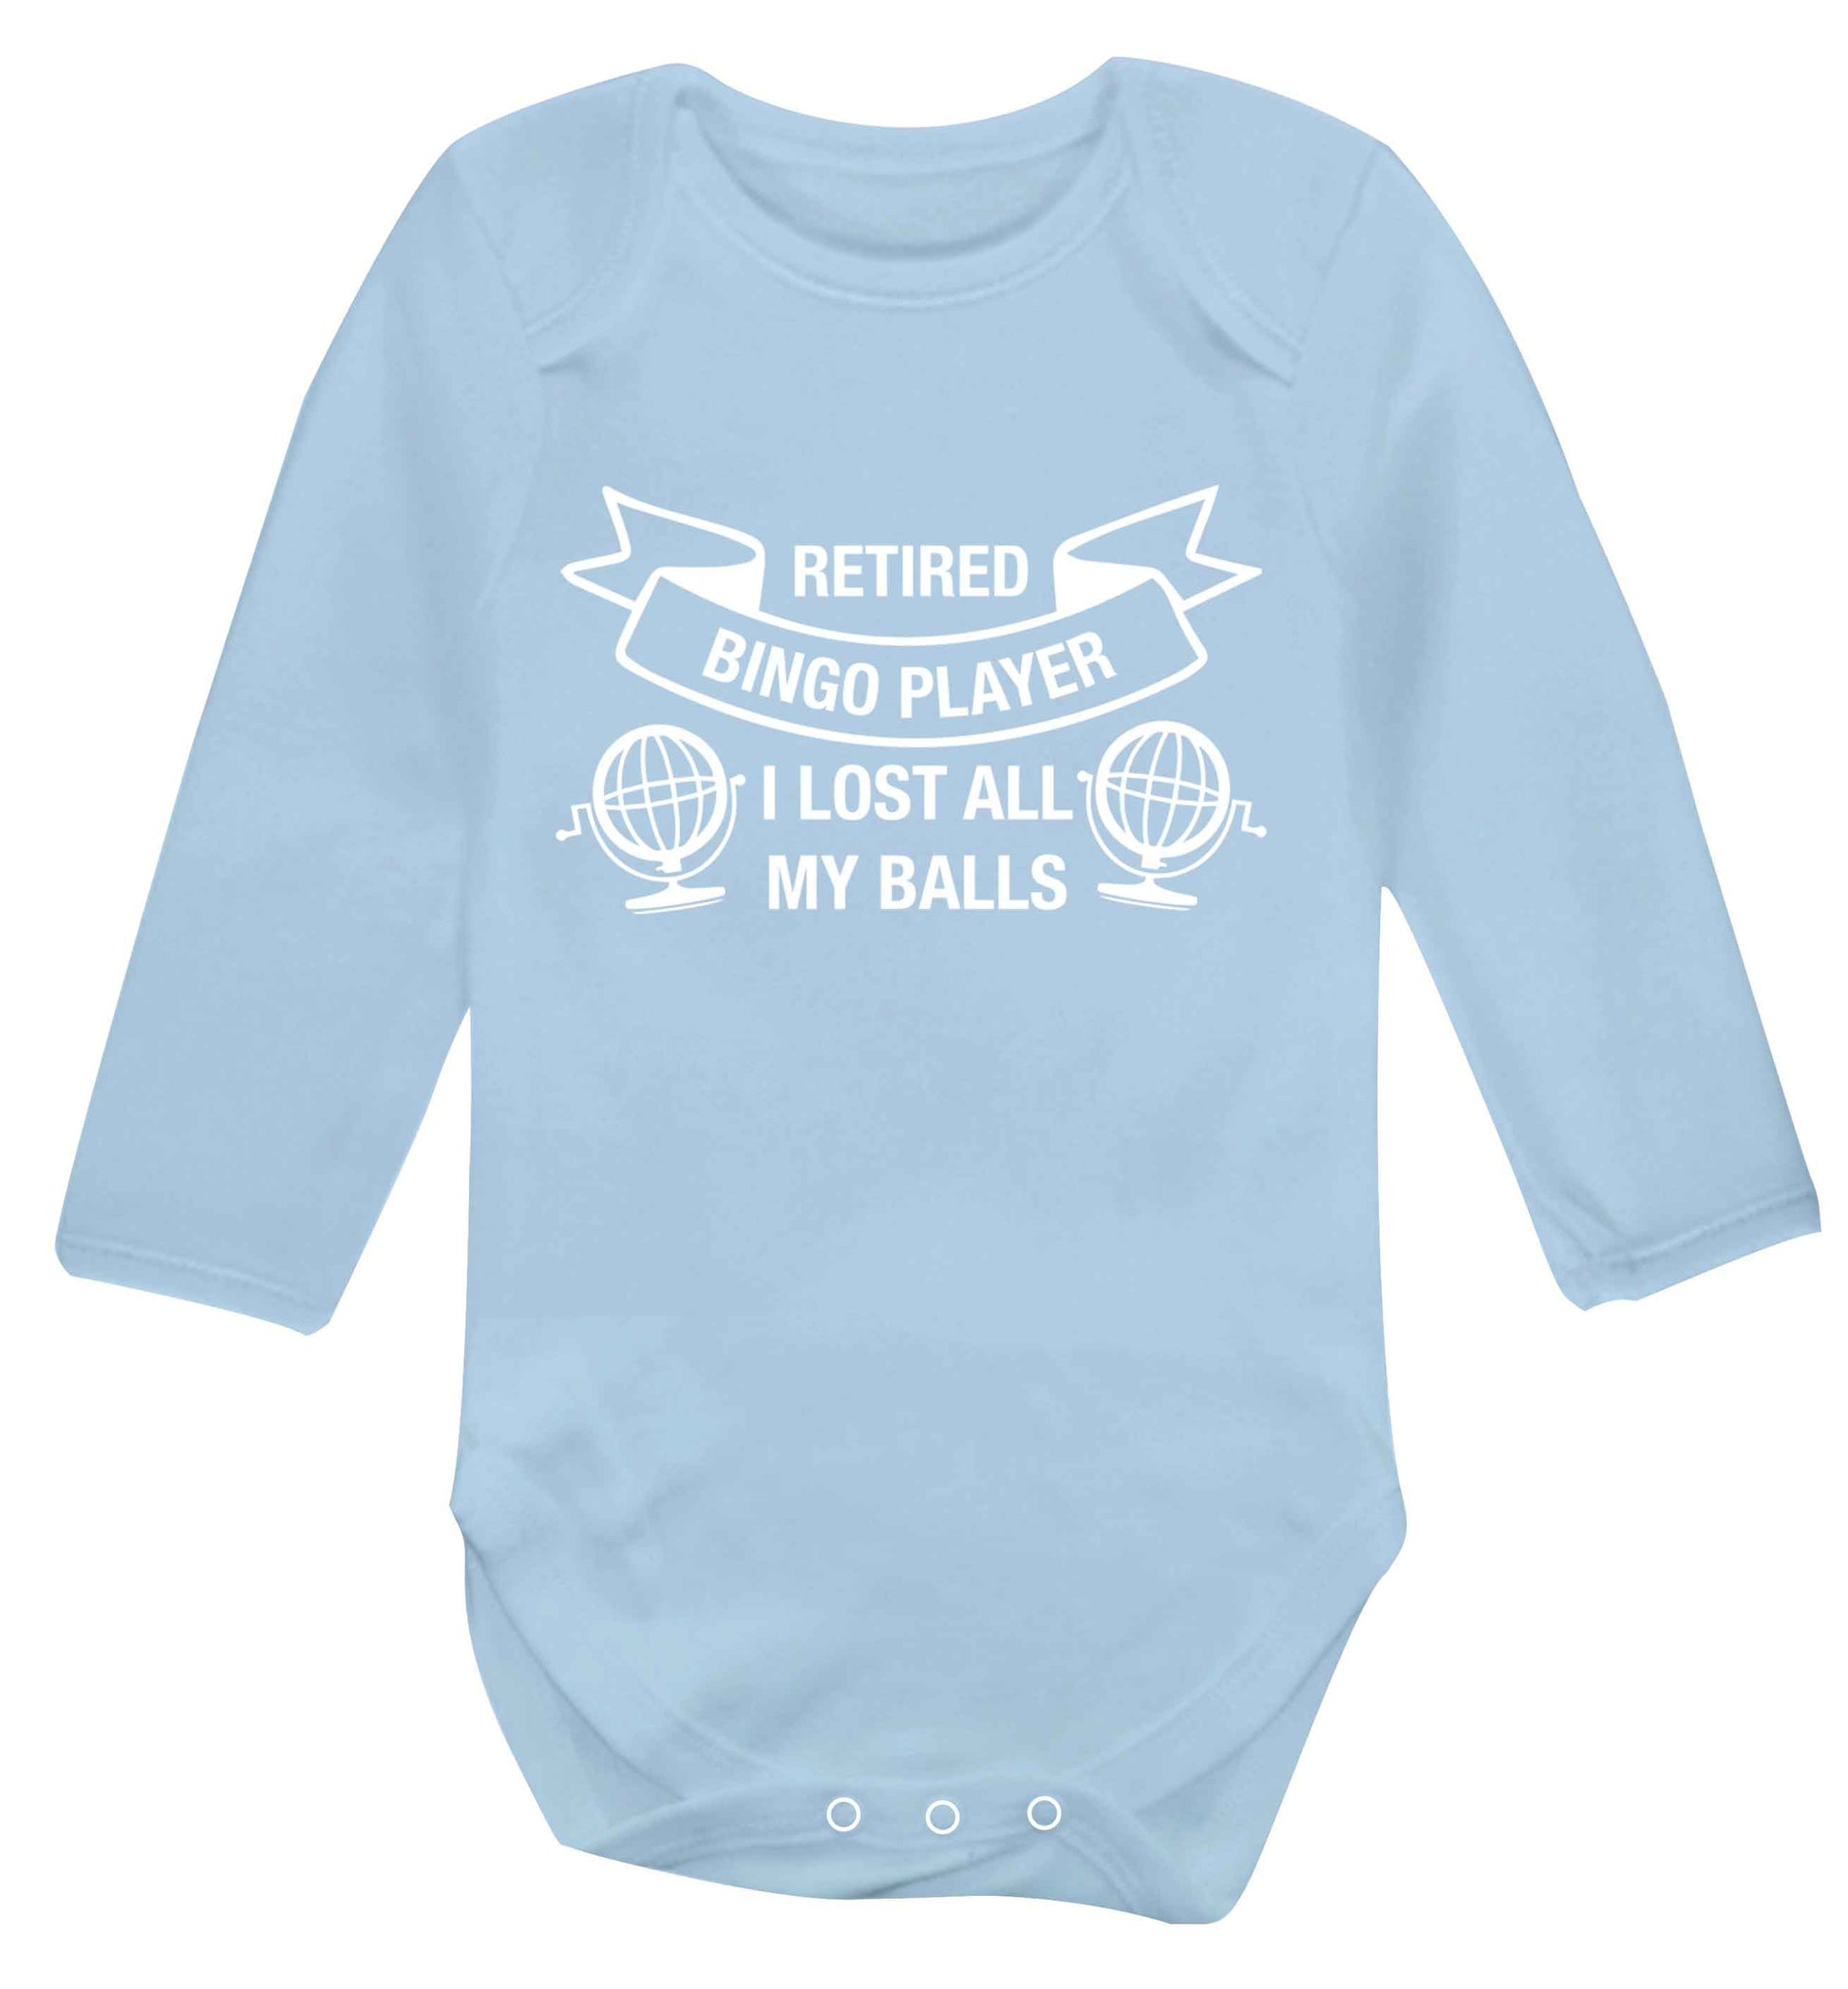 Retired bingo player I lost all my balls Baby Vest long sleeved pale blue 6-12 months